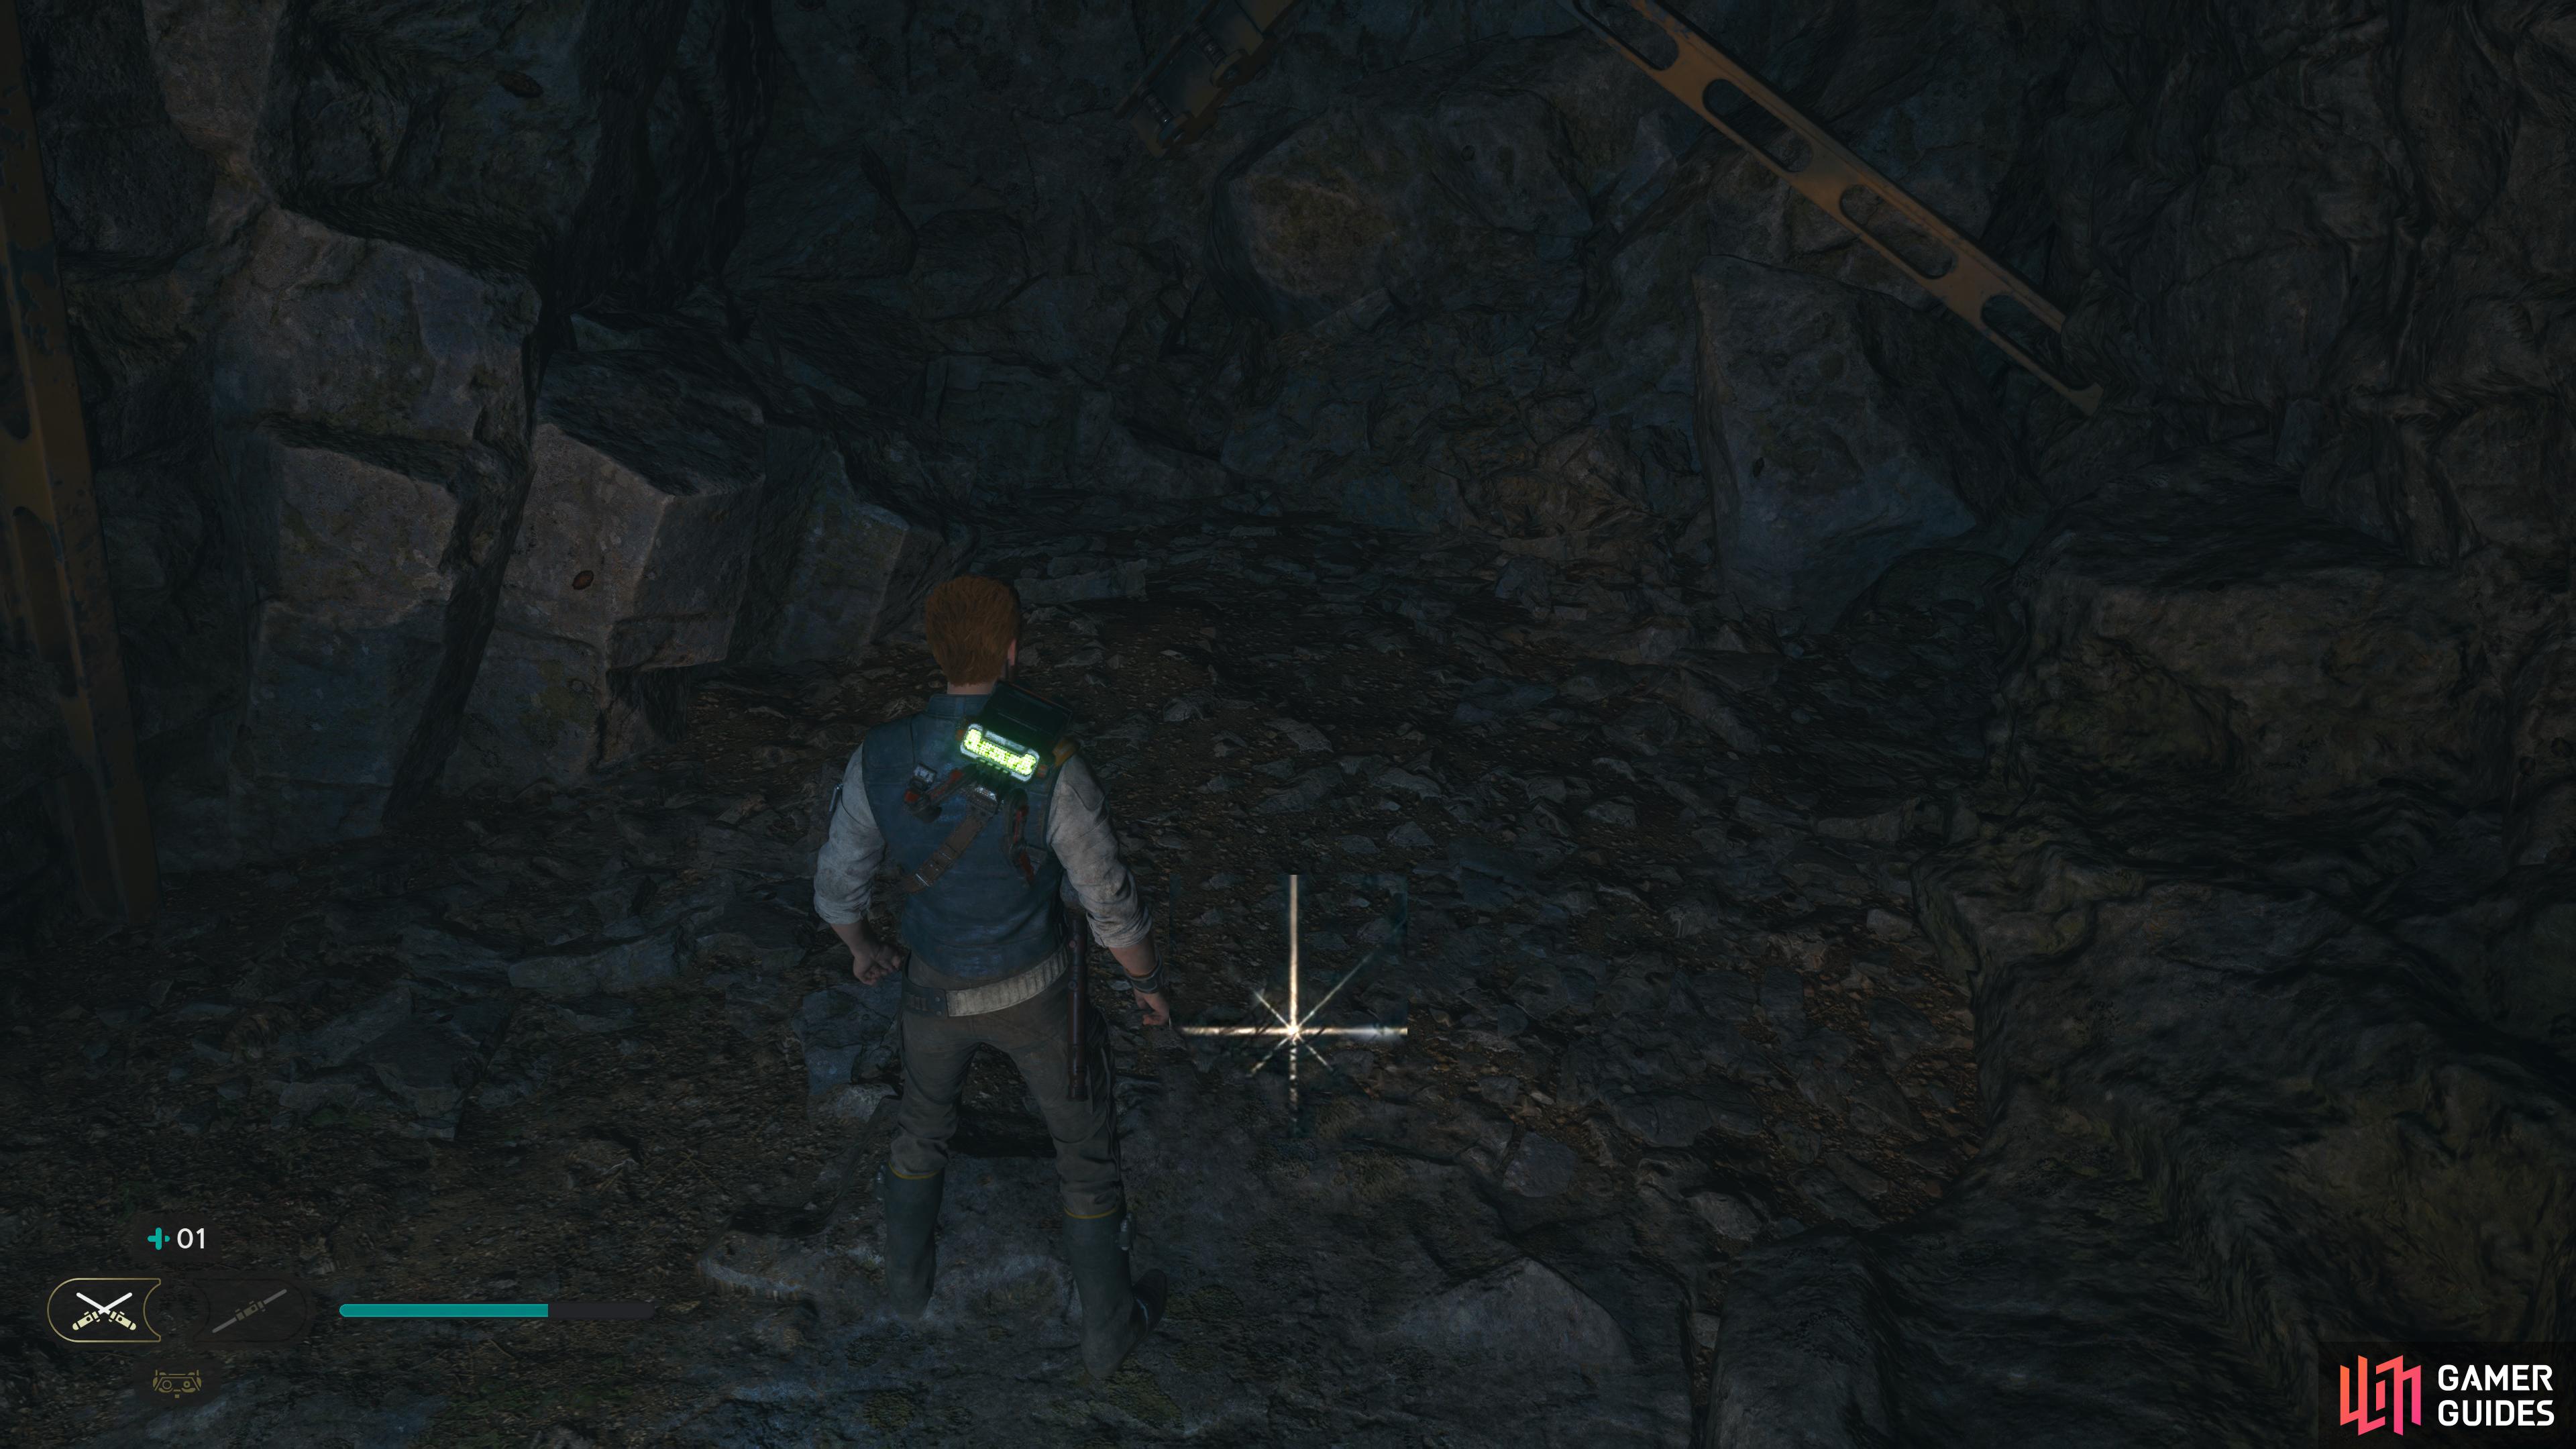 The second treasure is in the cave guarded by the two B1-Droids. Wall-jump on the wall to the left to reach the ledge containing the treasure.